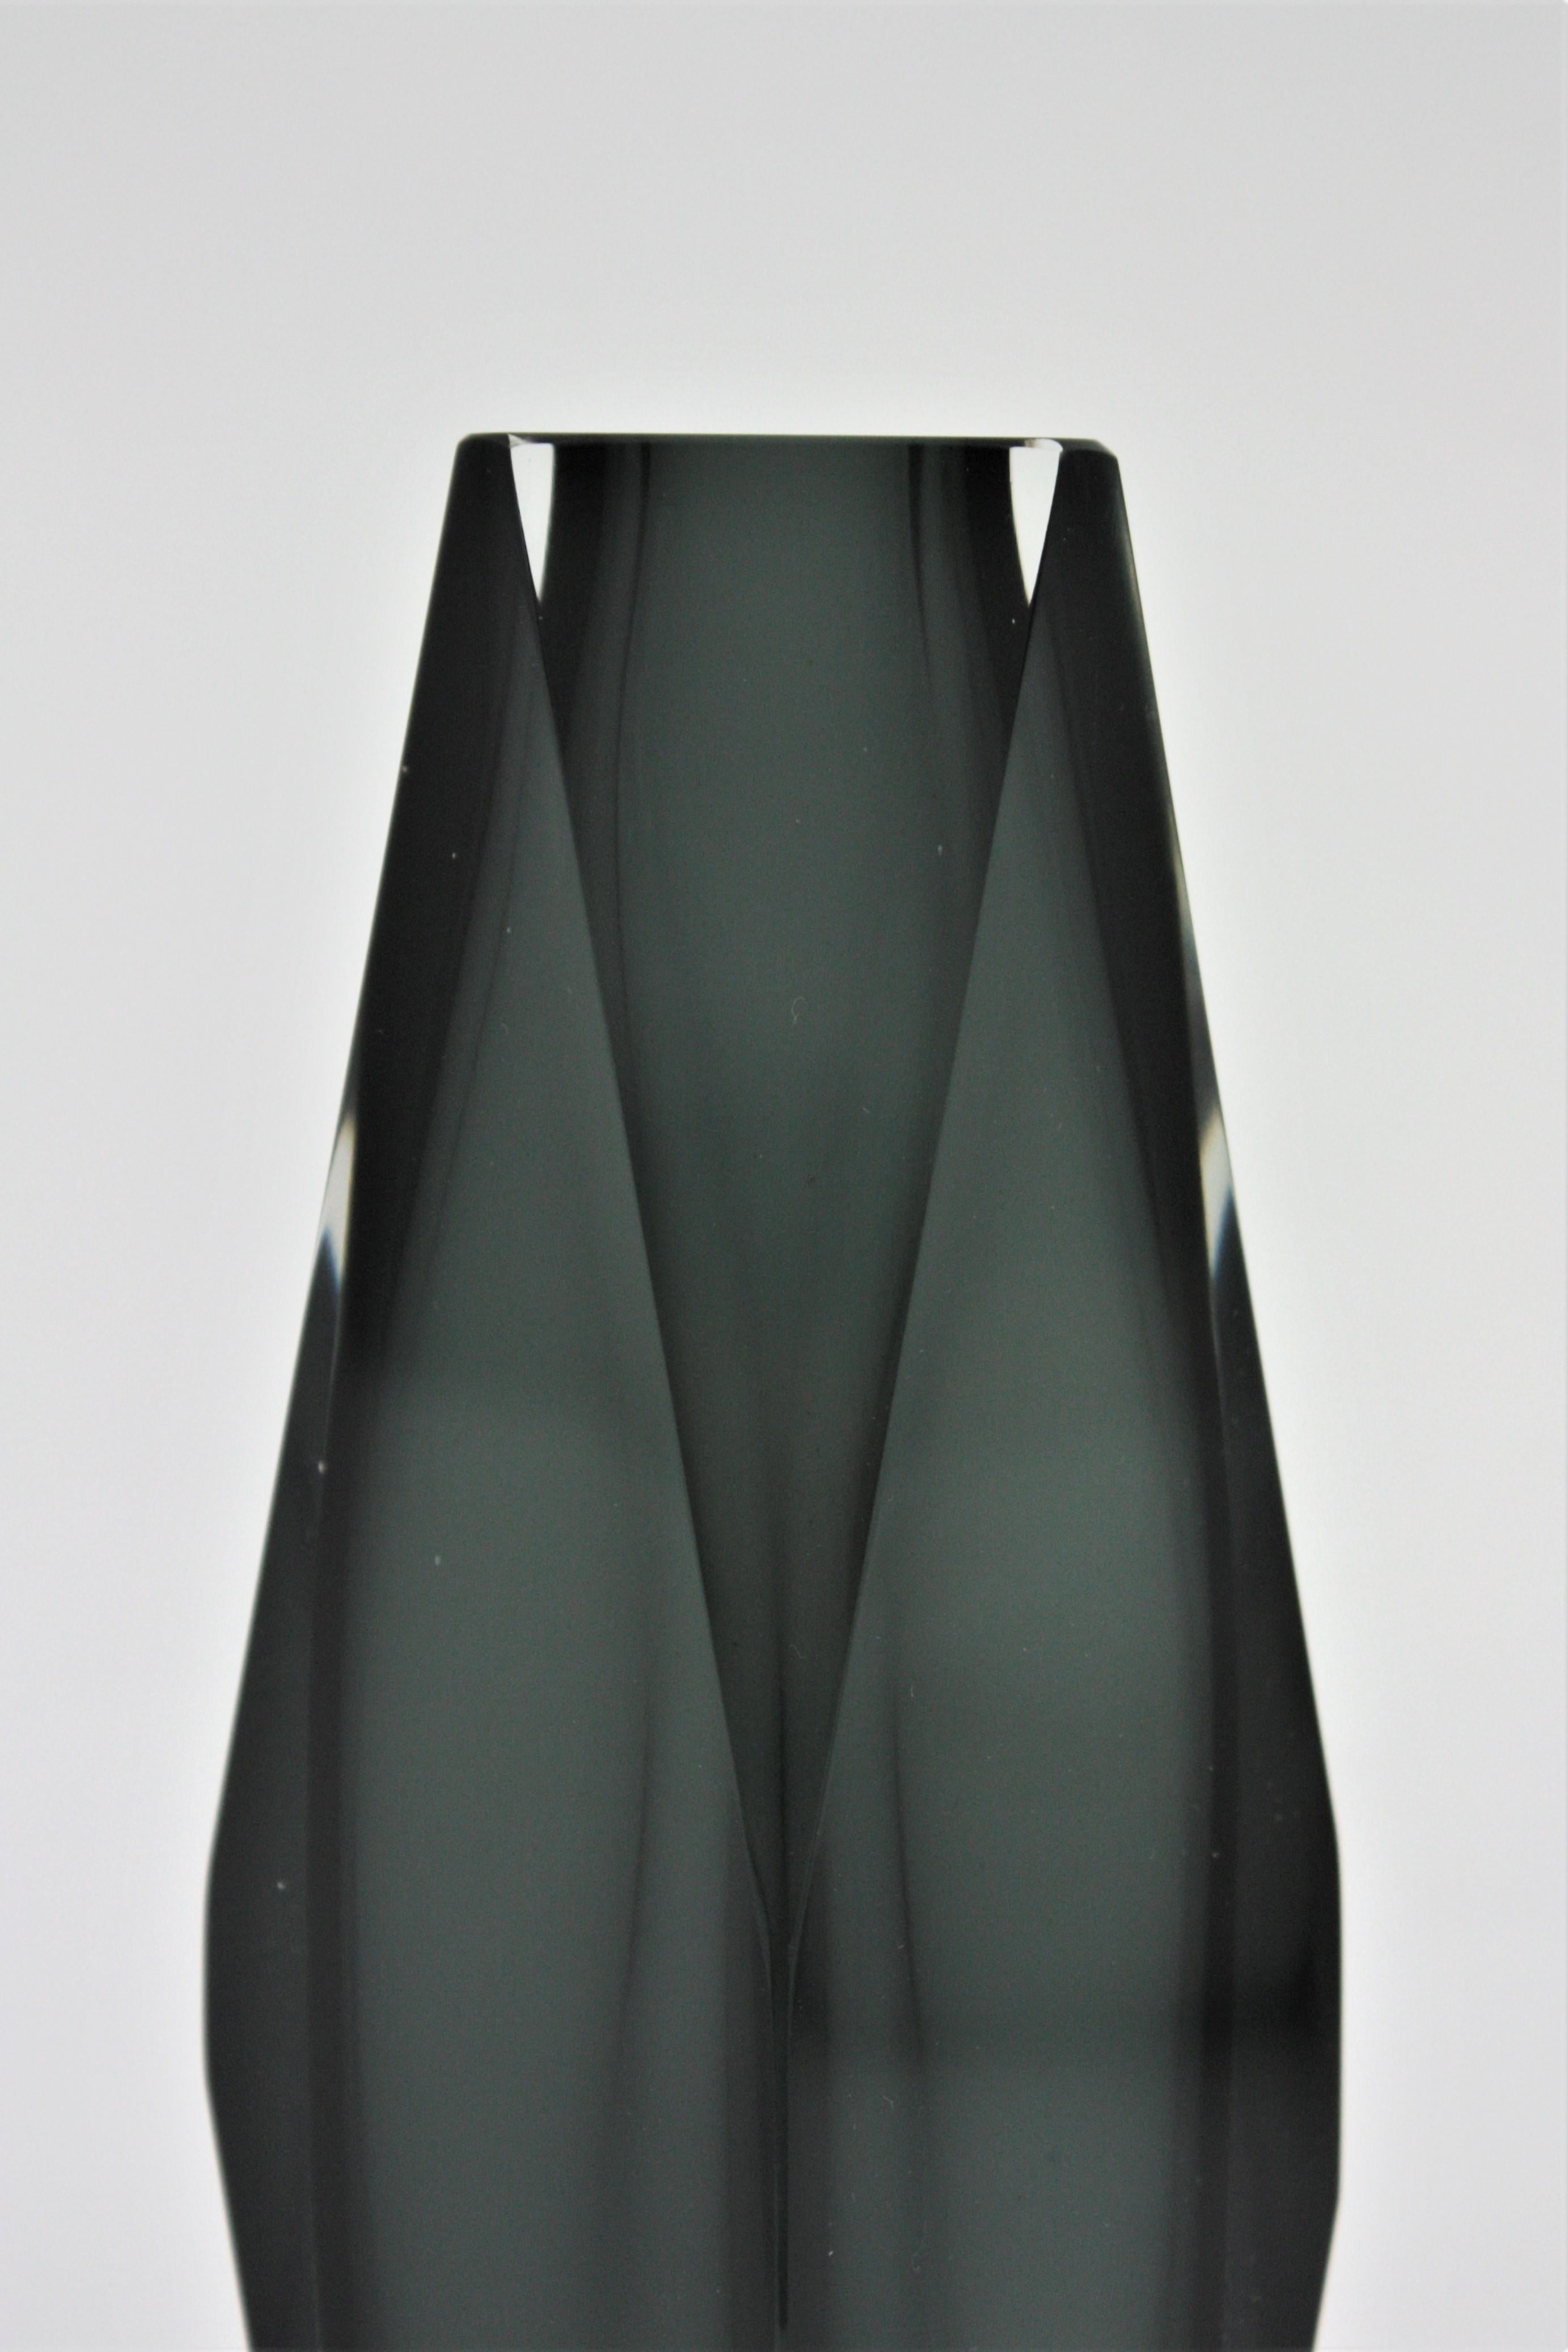 Hand-Crafted Giant Mandruzzato Murano Sommerso Smoked Grey Clear Faceted Art Glass Vase For Sale